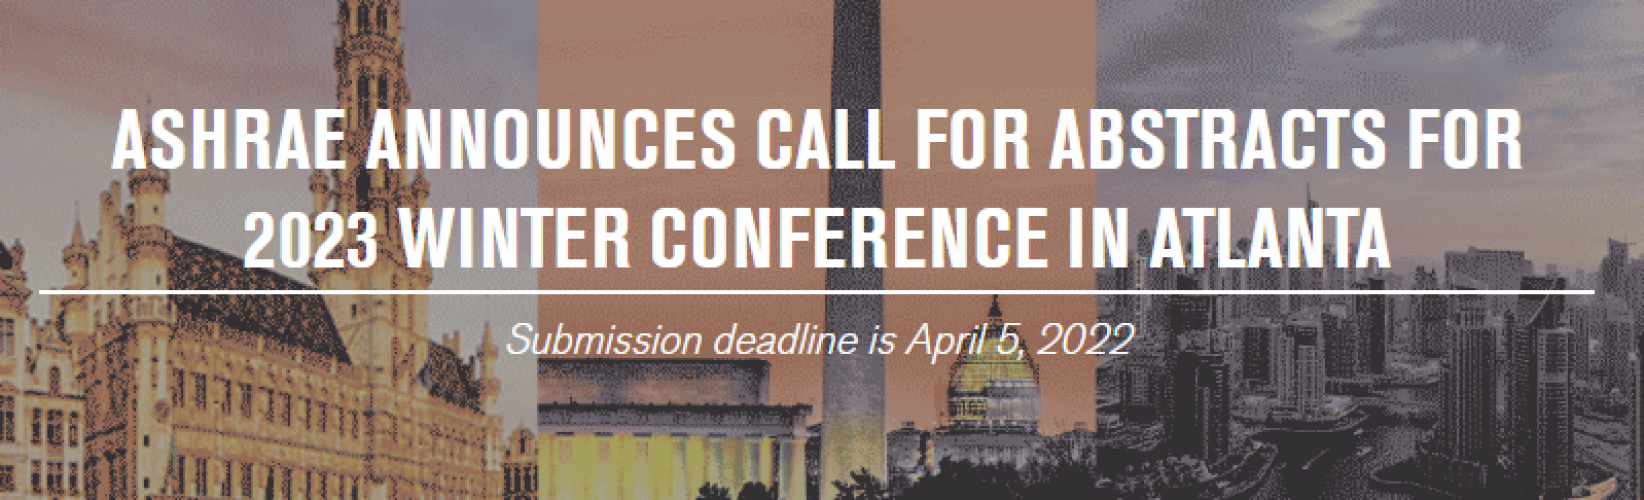 ashrae-announces-call-for-abstracts-for-2023-winter-conference-in-atlanta